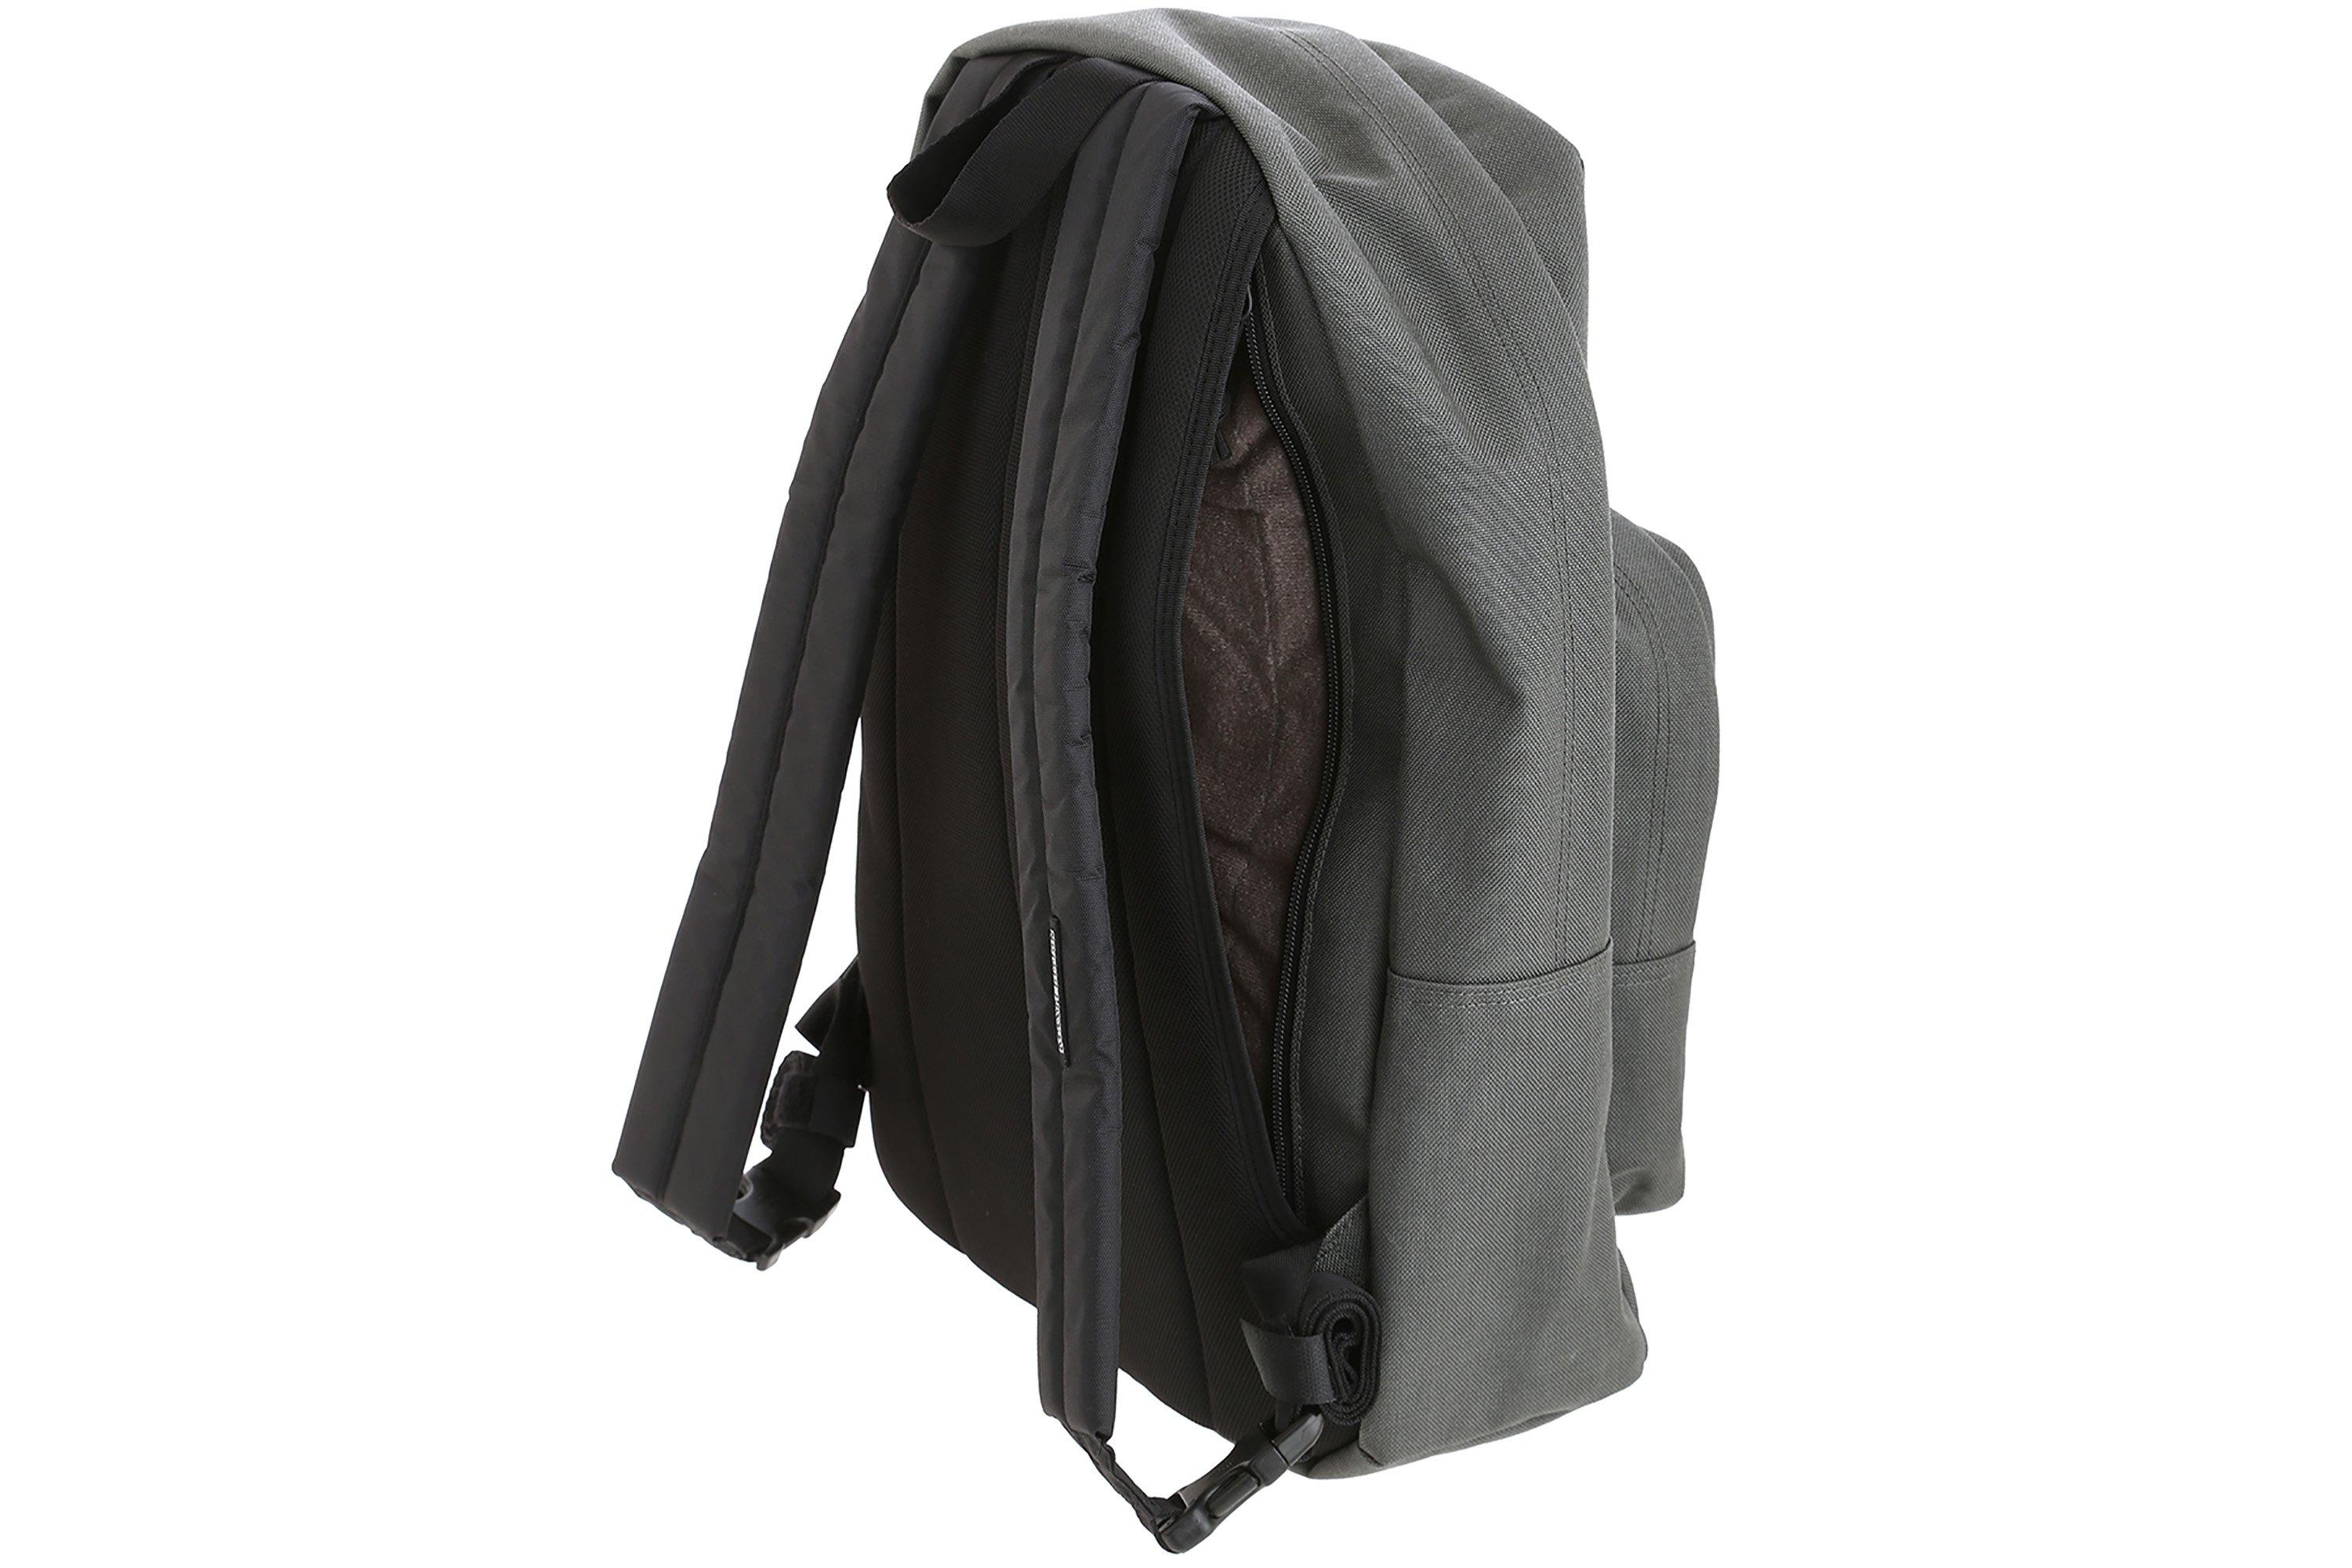 Maxpedition Prepared Citizen Classic v2.0 backpack 22L PREPCLS2W grey  Advantageously shopping at